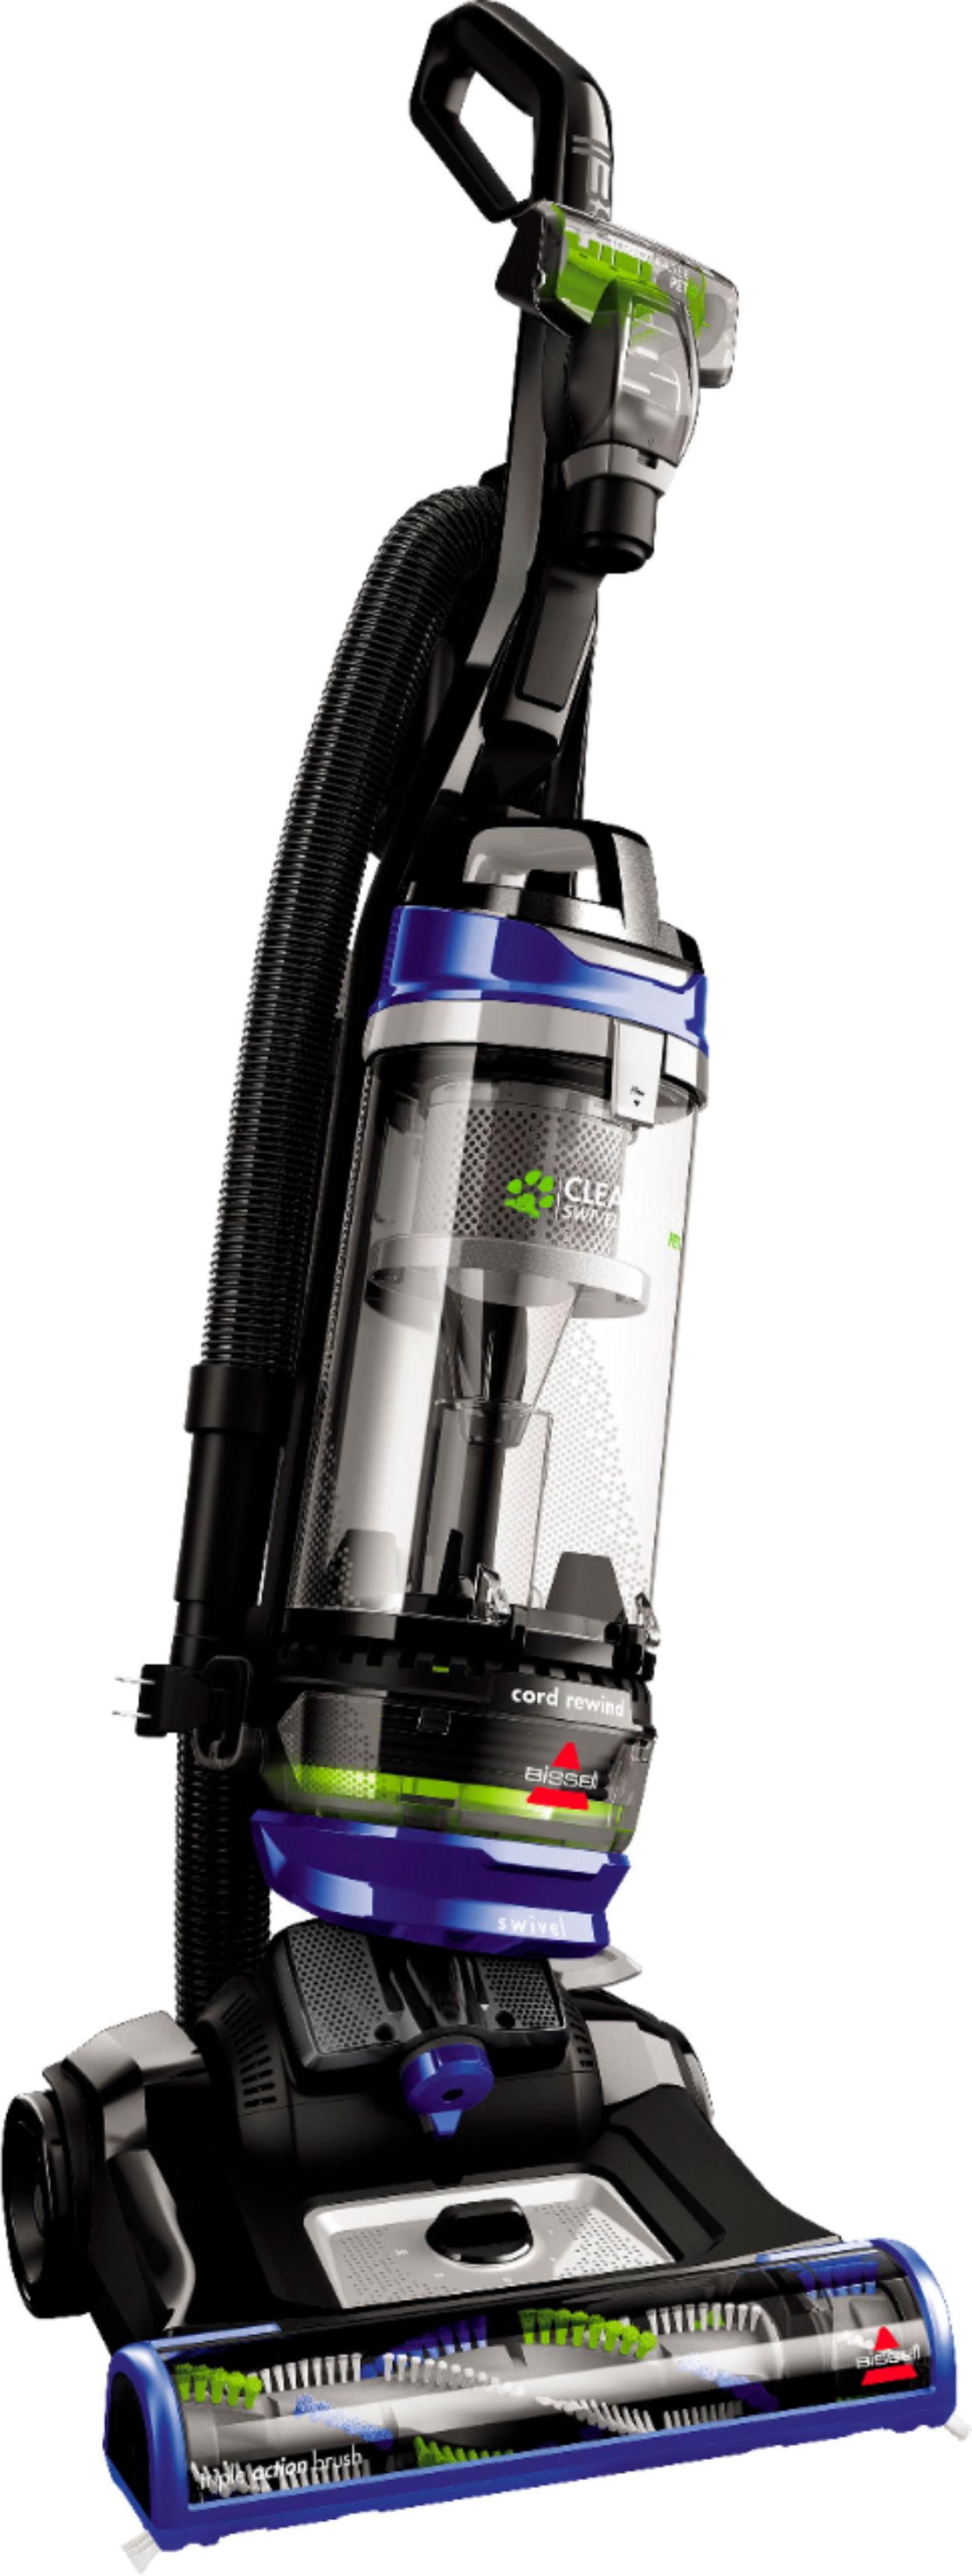 BISSELL - CleanView Upright Vacuum - Cobalt Blue/Black/Cha Cha Lime